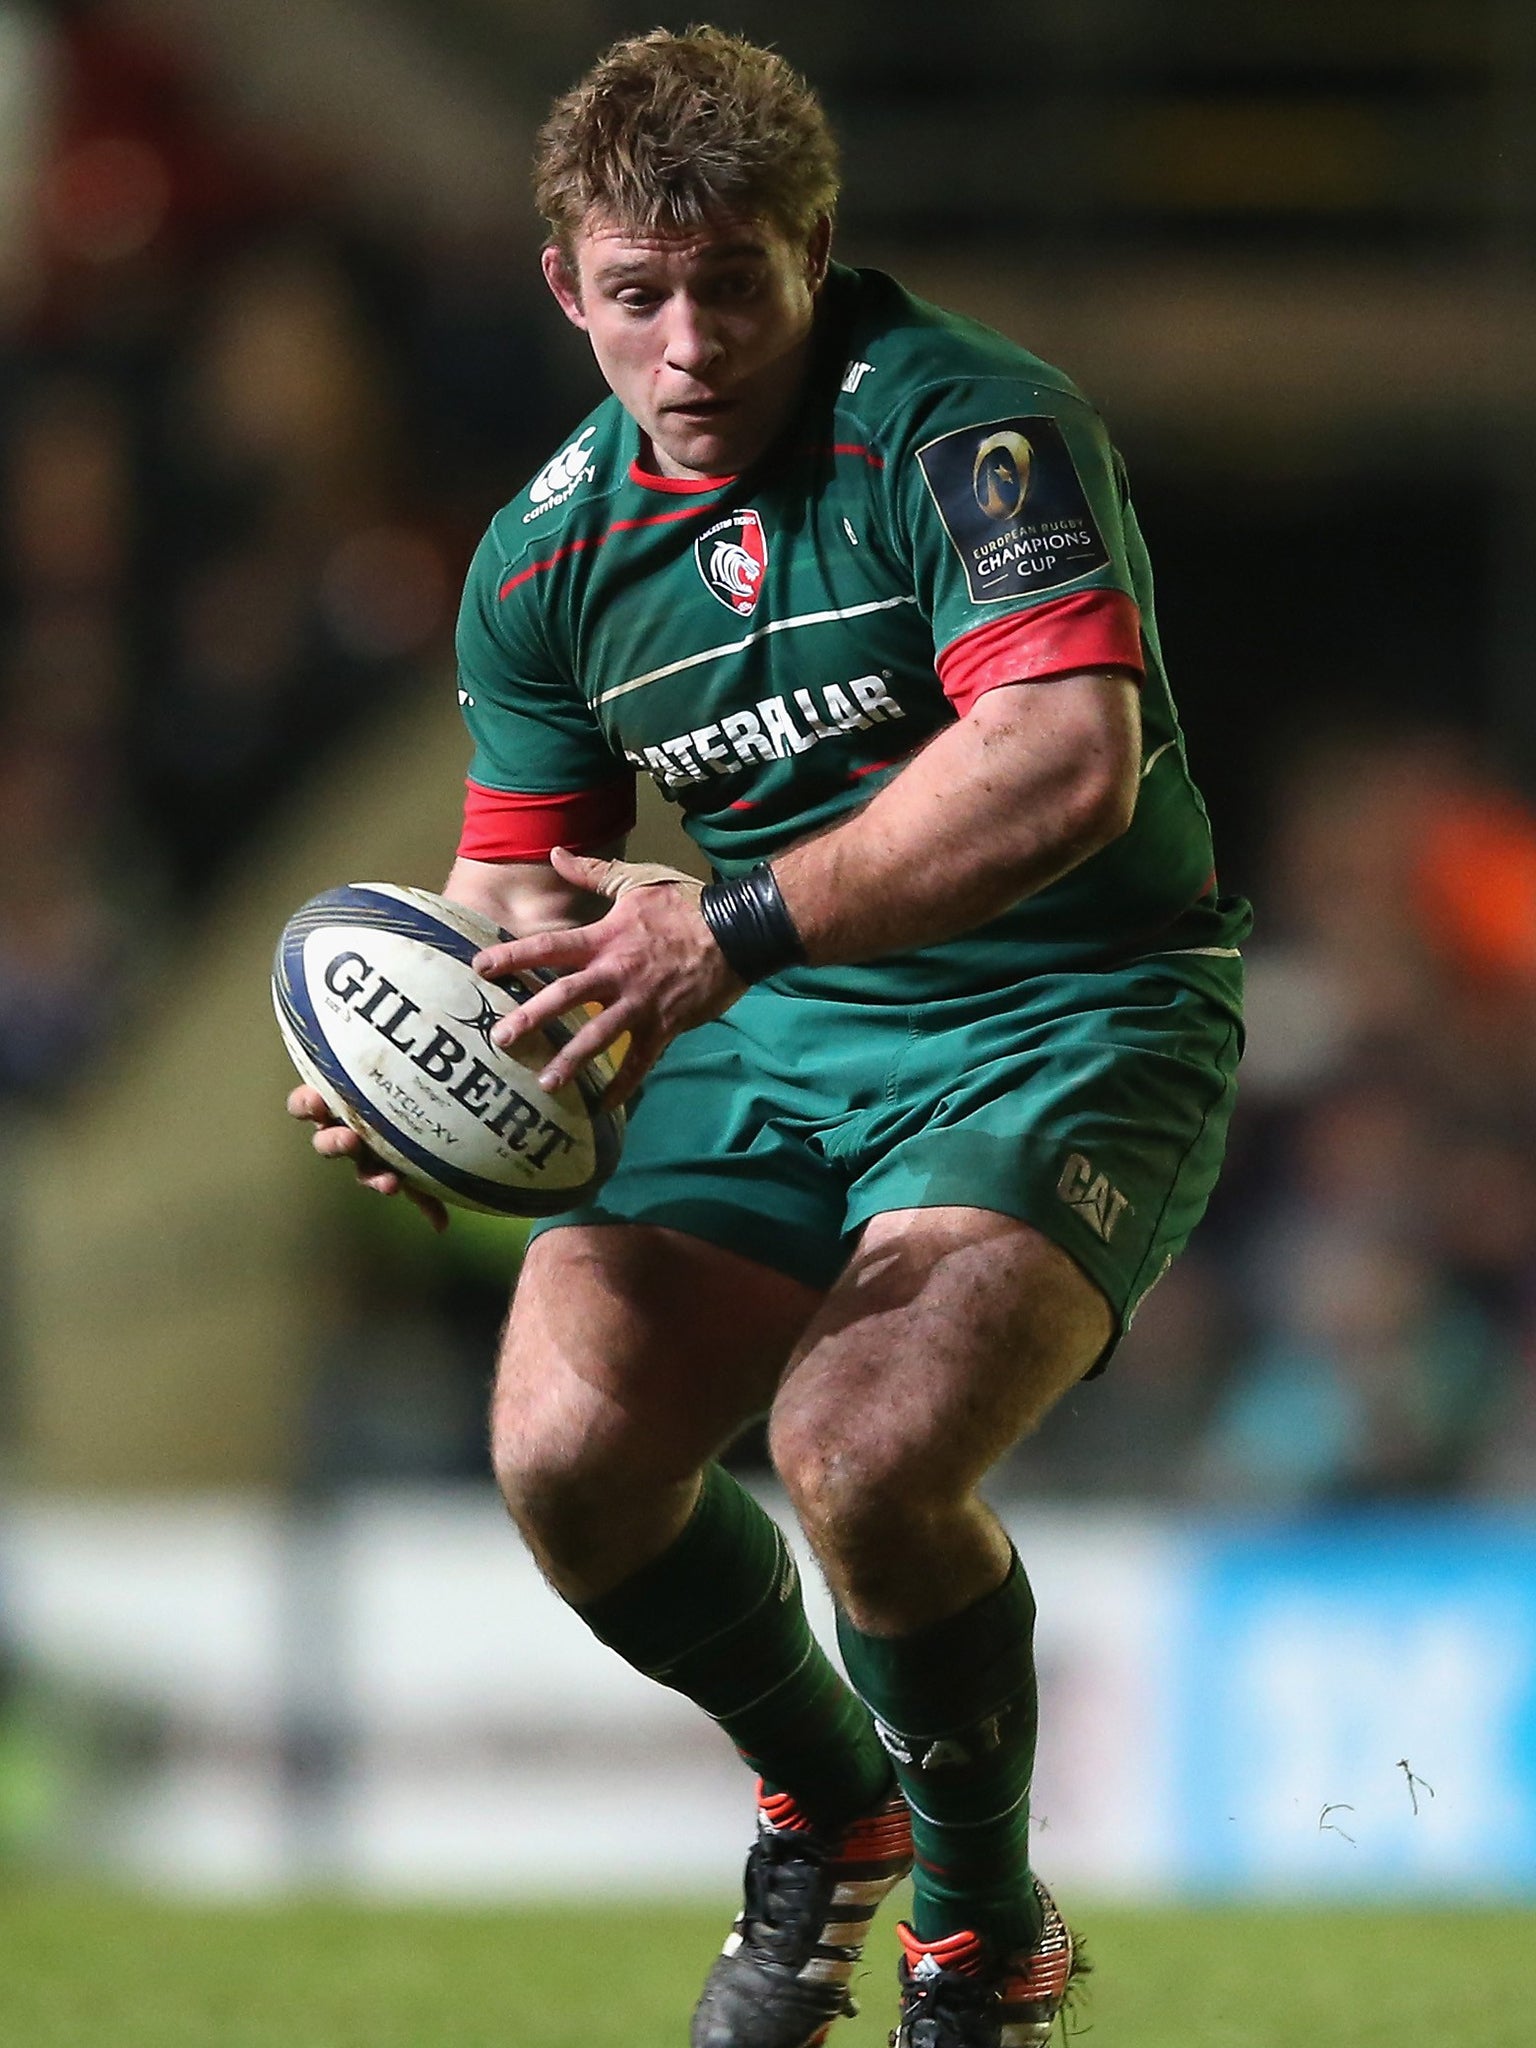 Tom Youngs scored two tries in Leicester’s comfortable victory over Scarlets last night